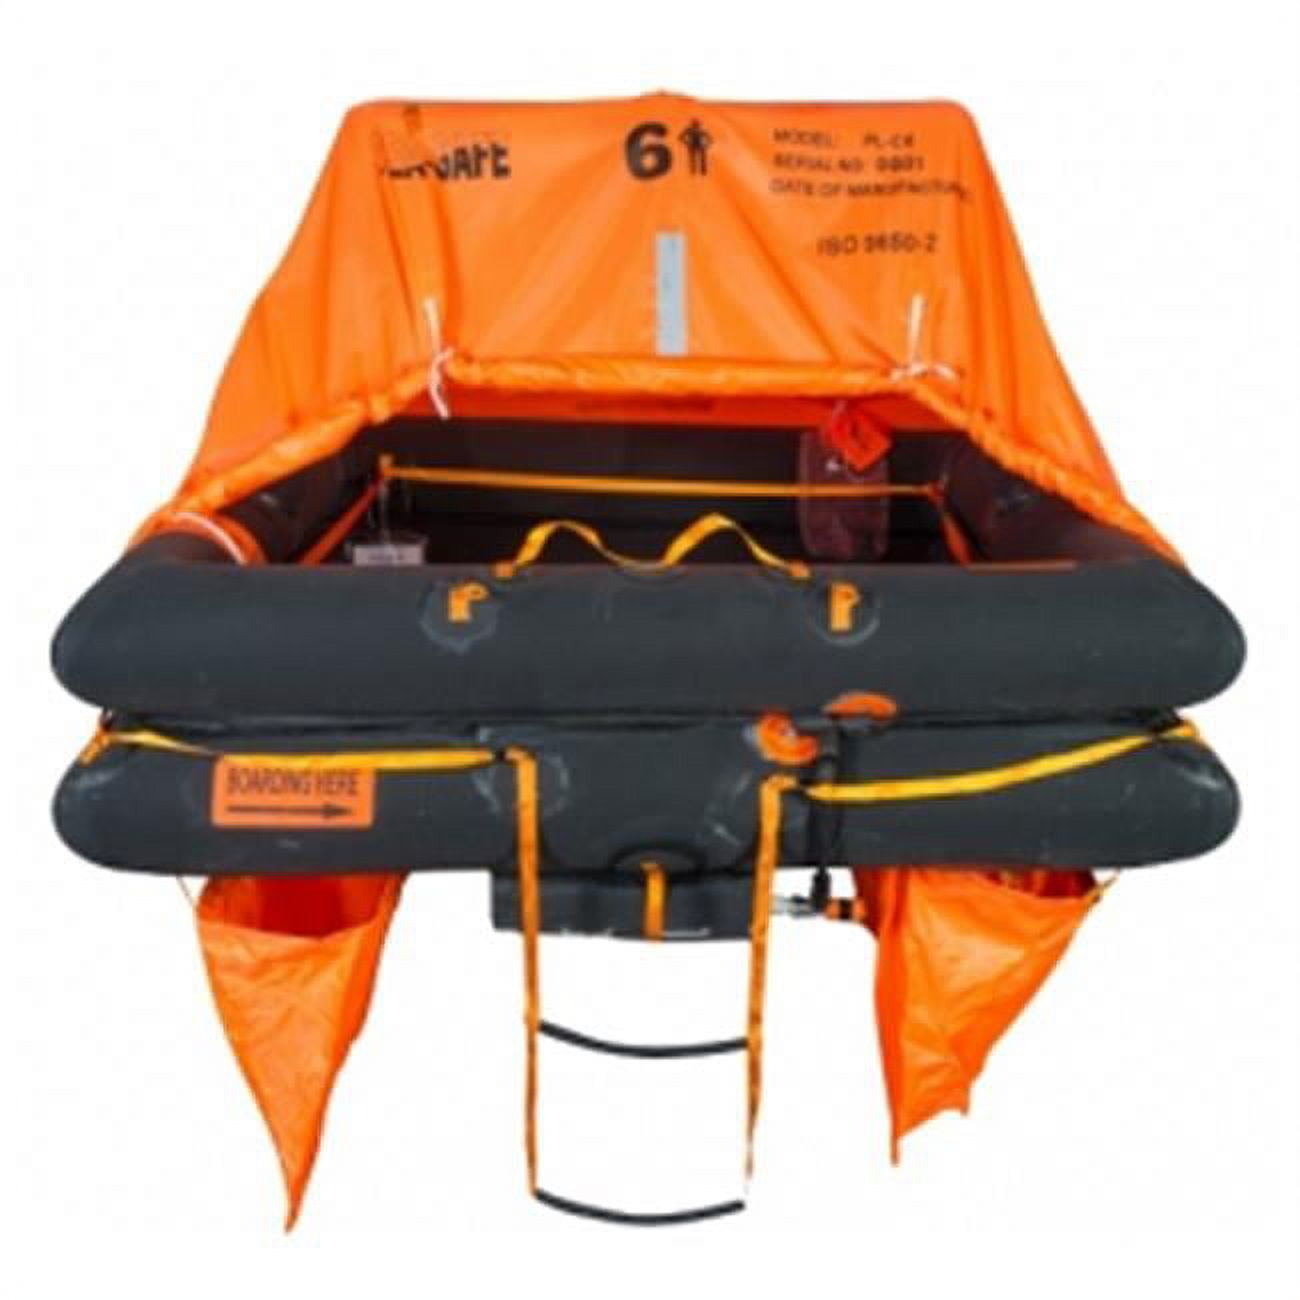 DXPLC4CR 4 Person Pro-Light Recreational Coastal Liferaft in Container -  Seasafe